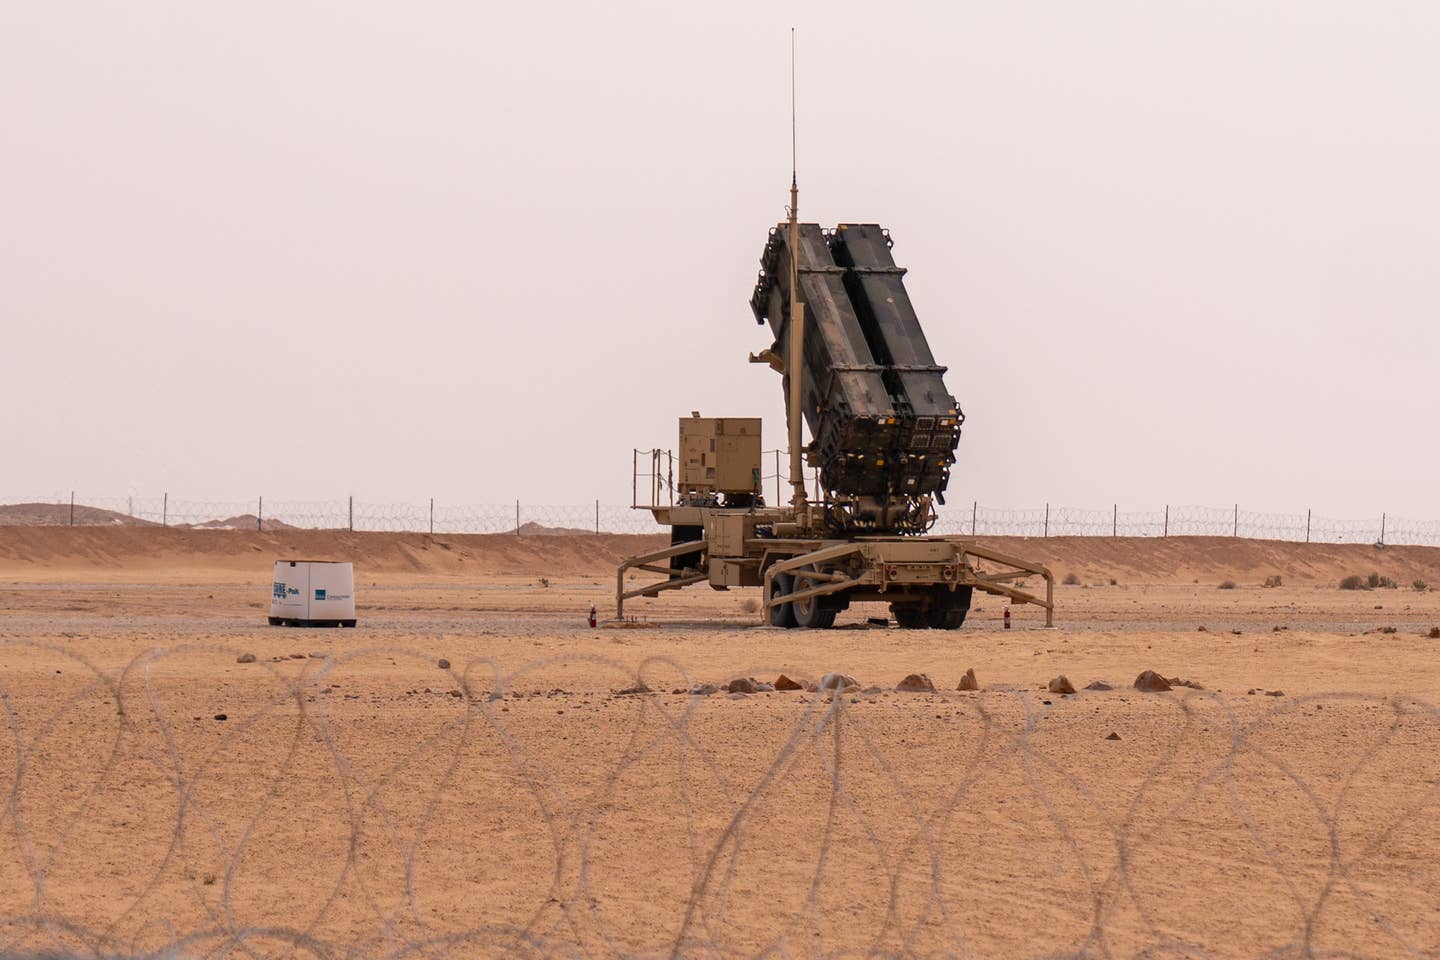 A Patriot surface-to-air missile system battery positioned at Prince Sultan Air Base in Saudi Arabia, where the CENTCOM initially wanted to base the Red Sands center. <em>Credit: State Department photo by Ron Przysucha/Wikimedia Commons</em>